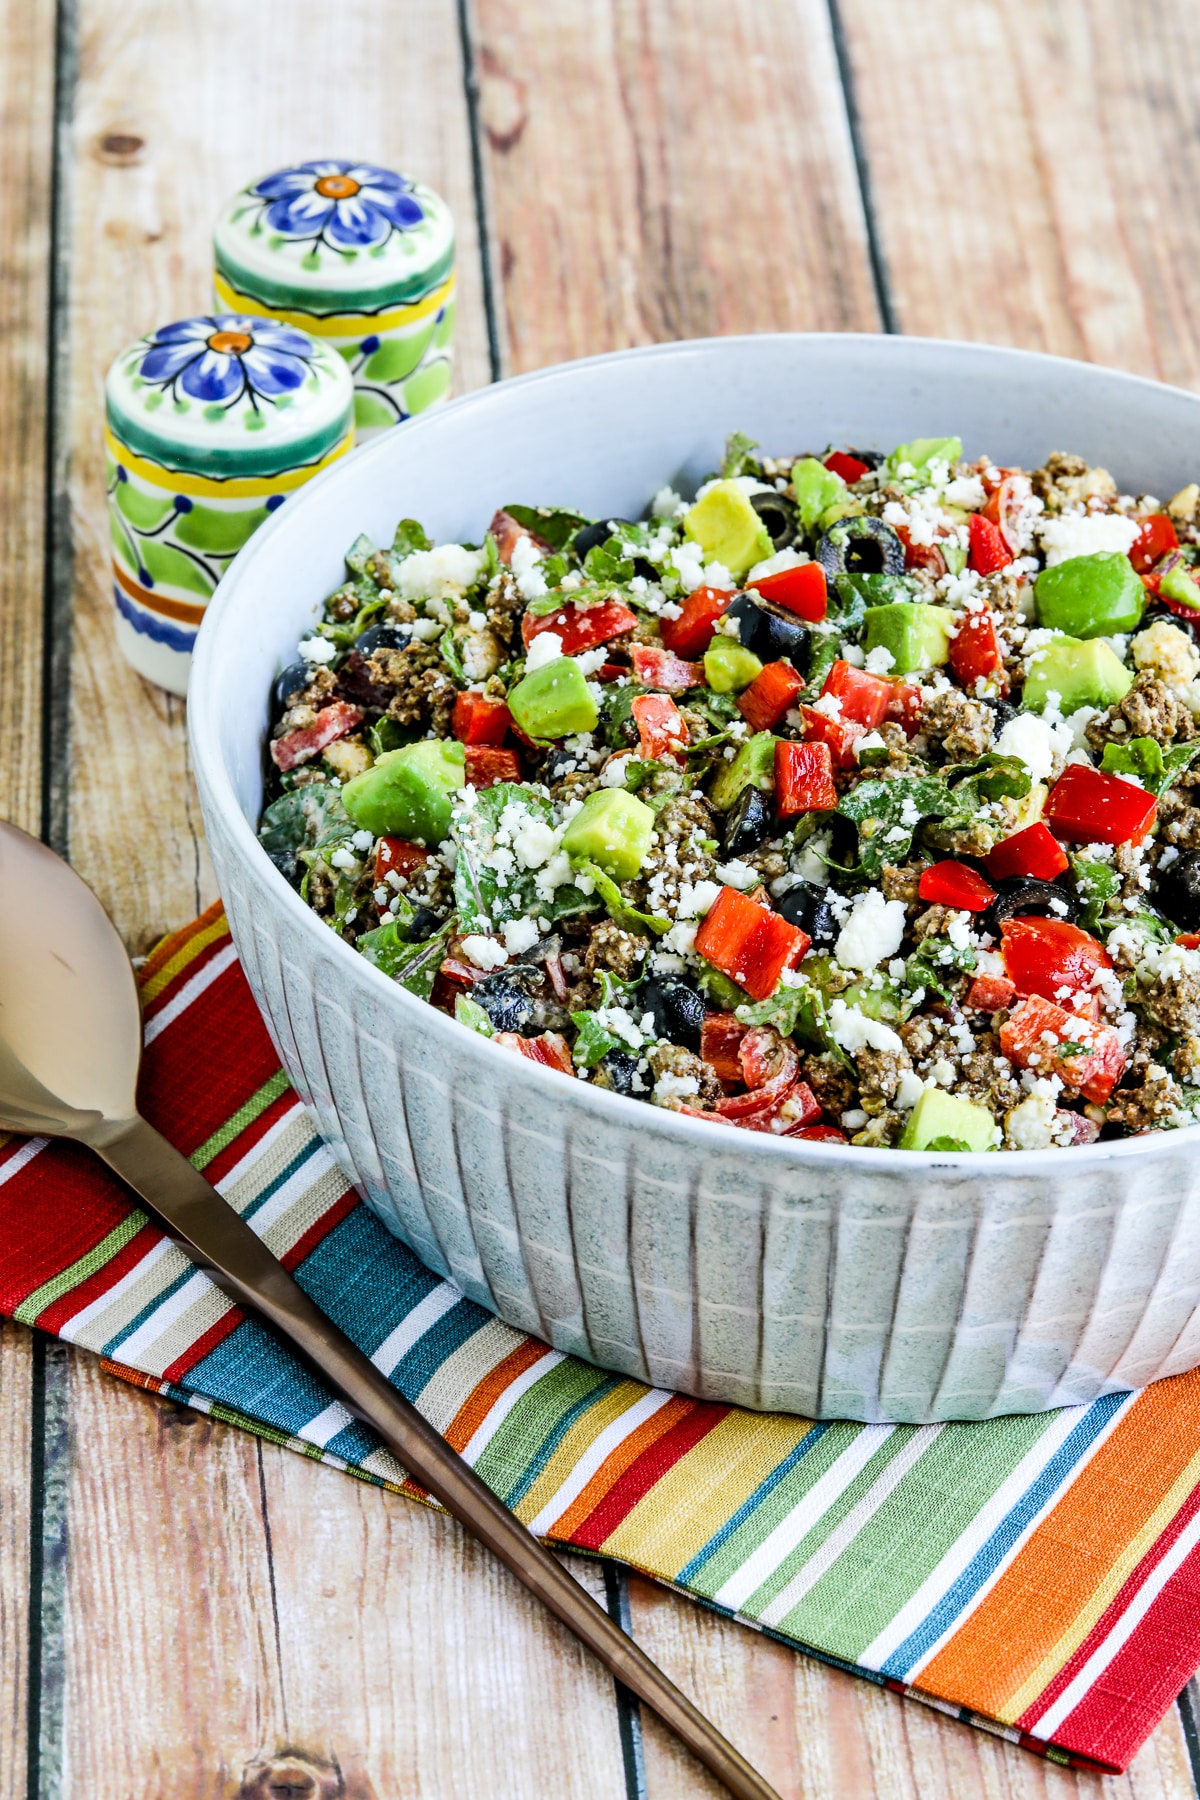 Ground beef taco salad with kale, tomato, and avocado as shown in serving bowl.